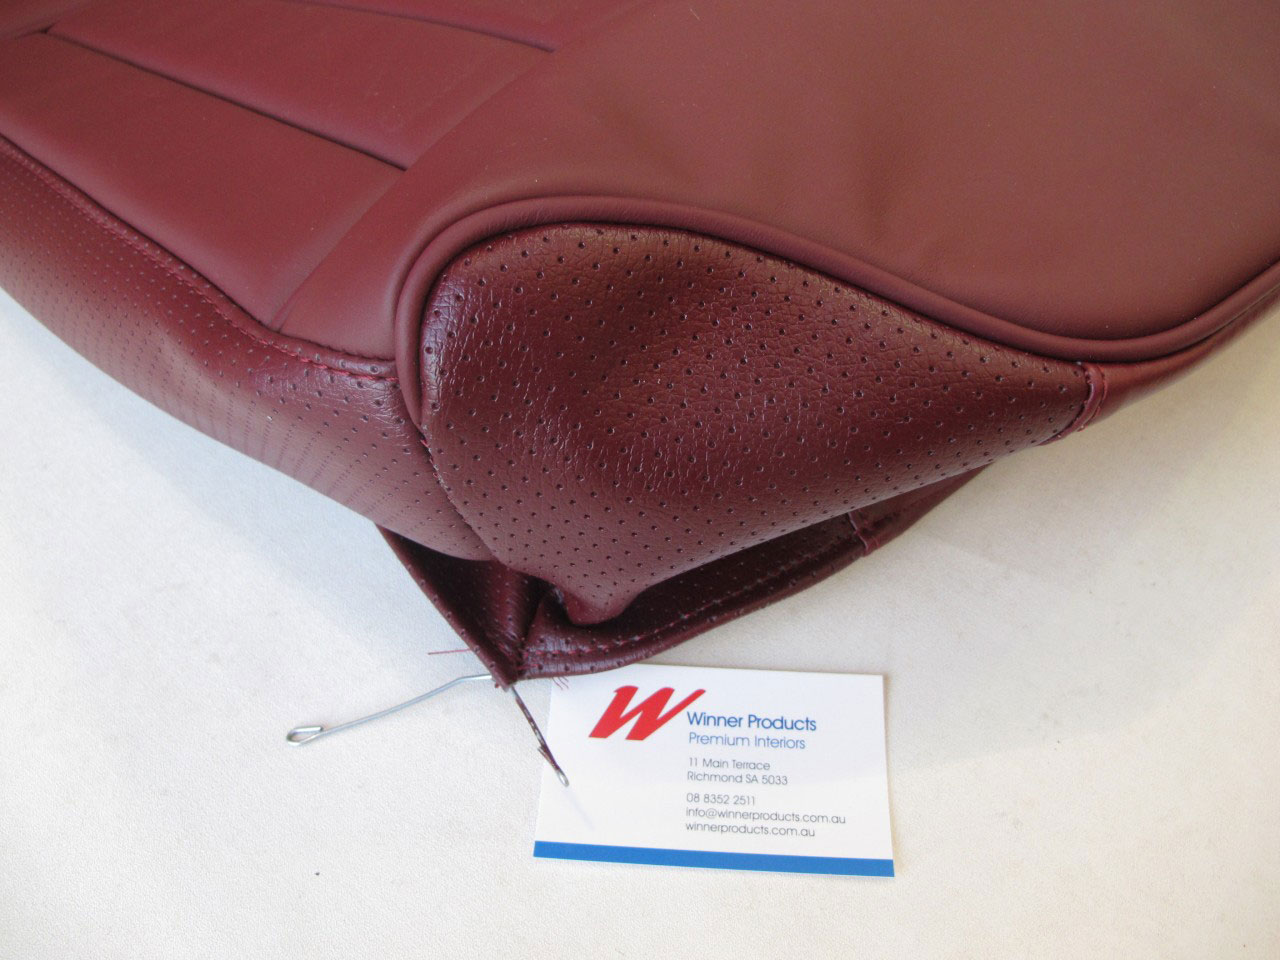 Holden Premier EH Premier Wagon C79 Waldorf Red Seat Covers (Image 6 of 6)